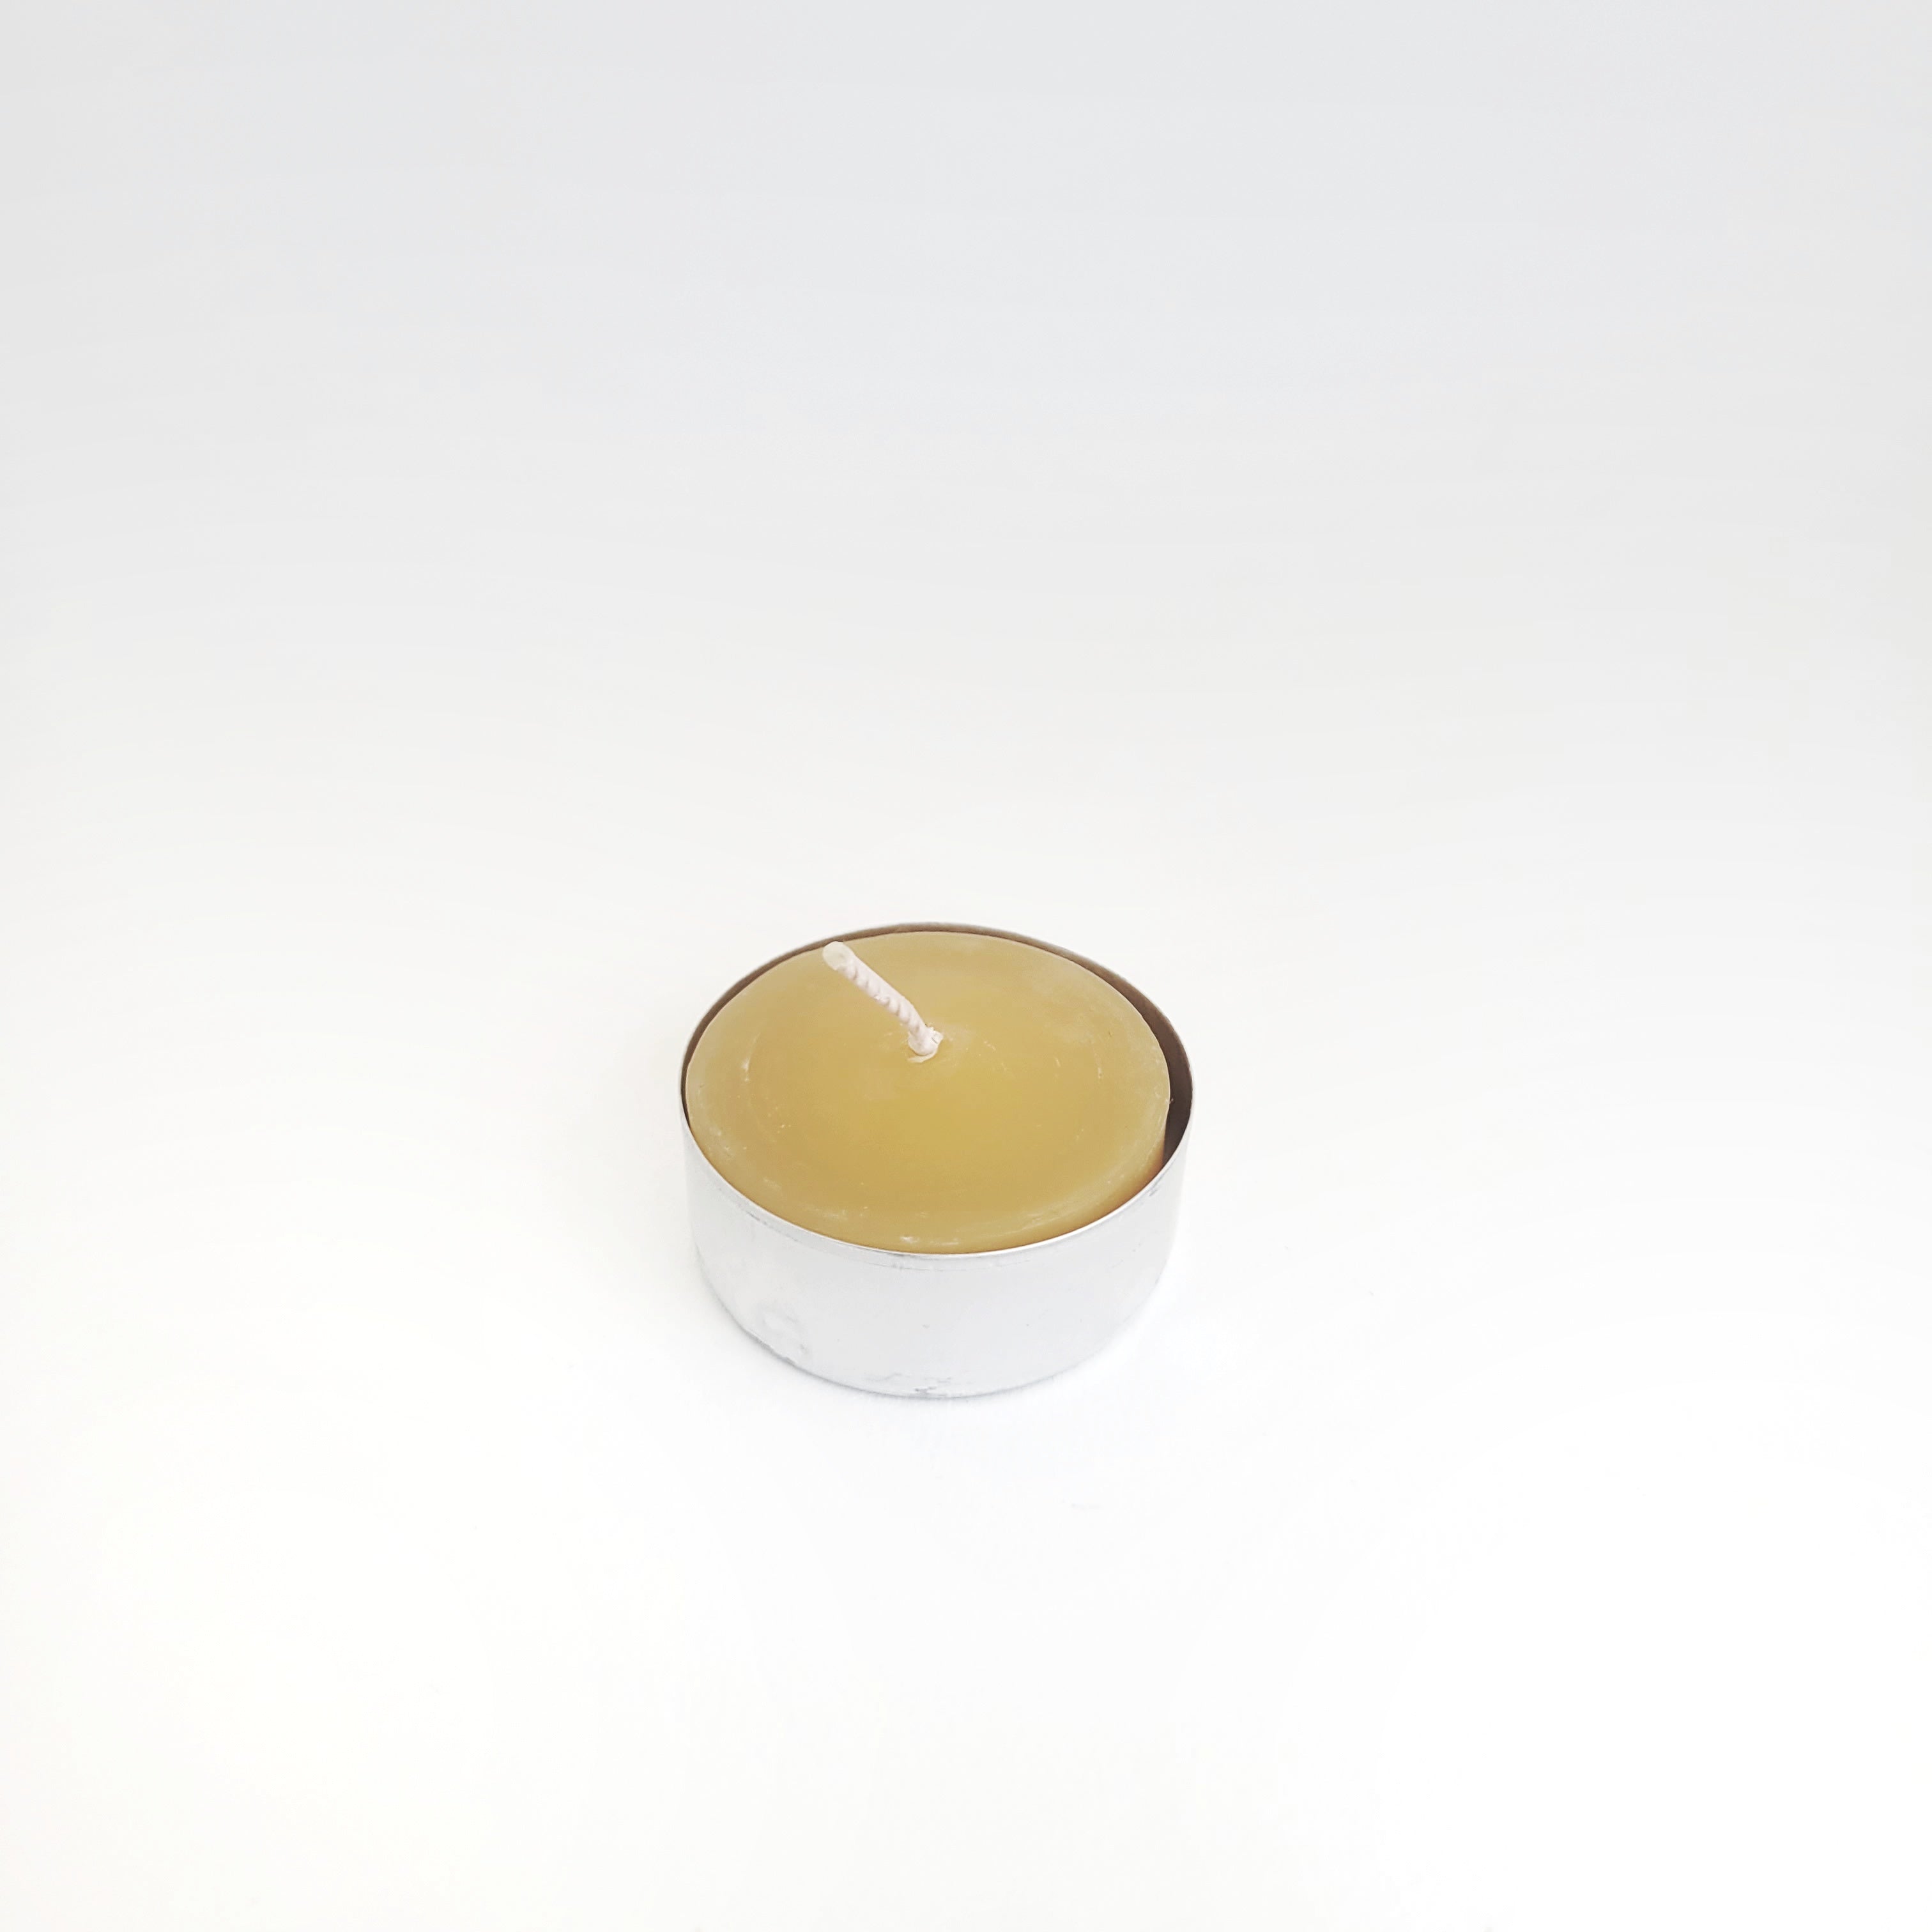 Single natural honey-colored beeswax tealight in a tin cup, perfect for eco-friendly home decor and ambiance.